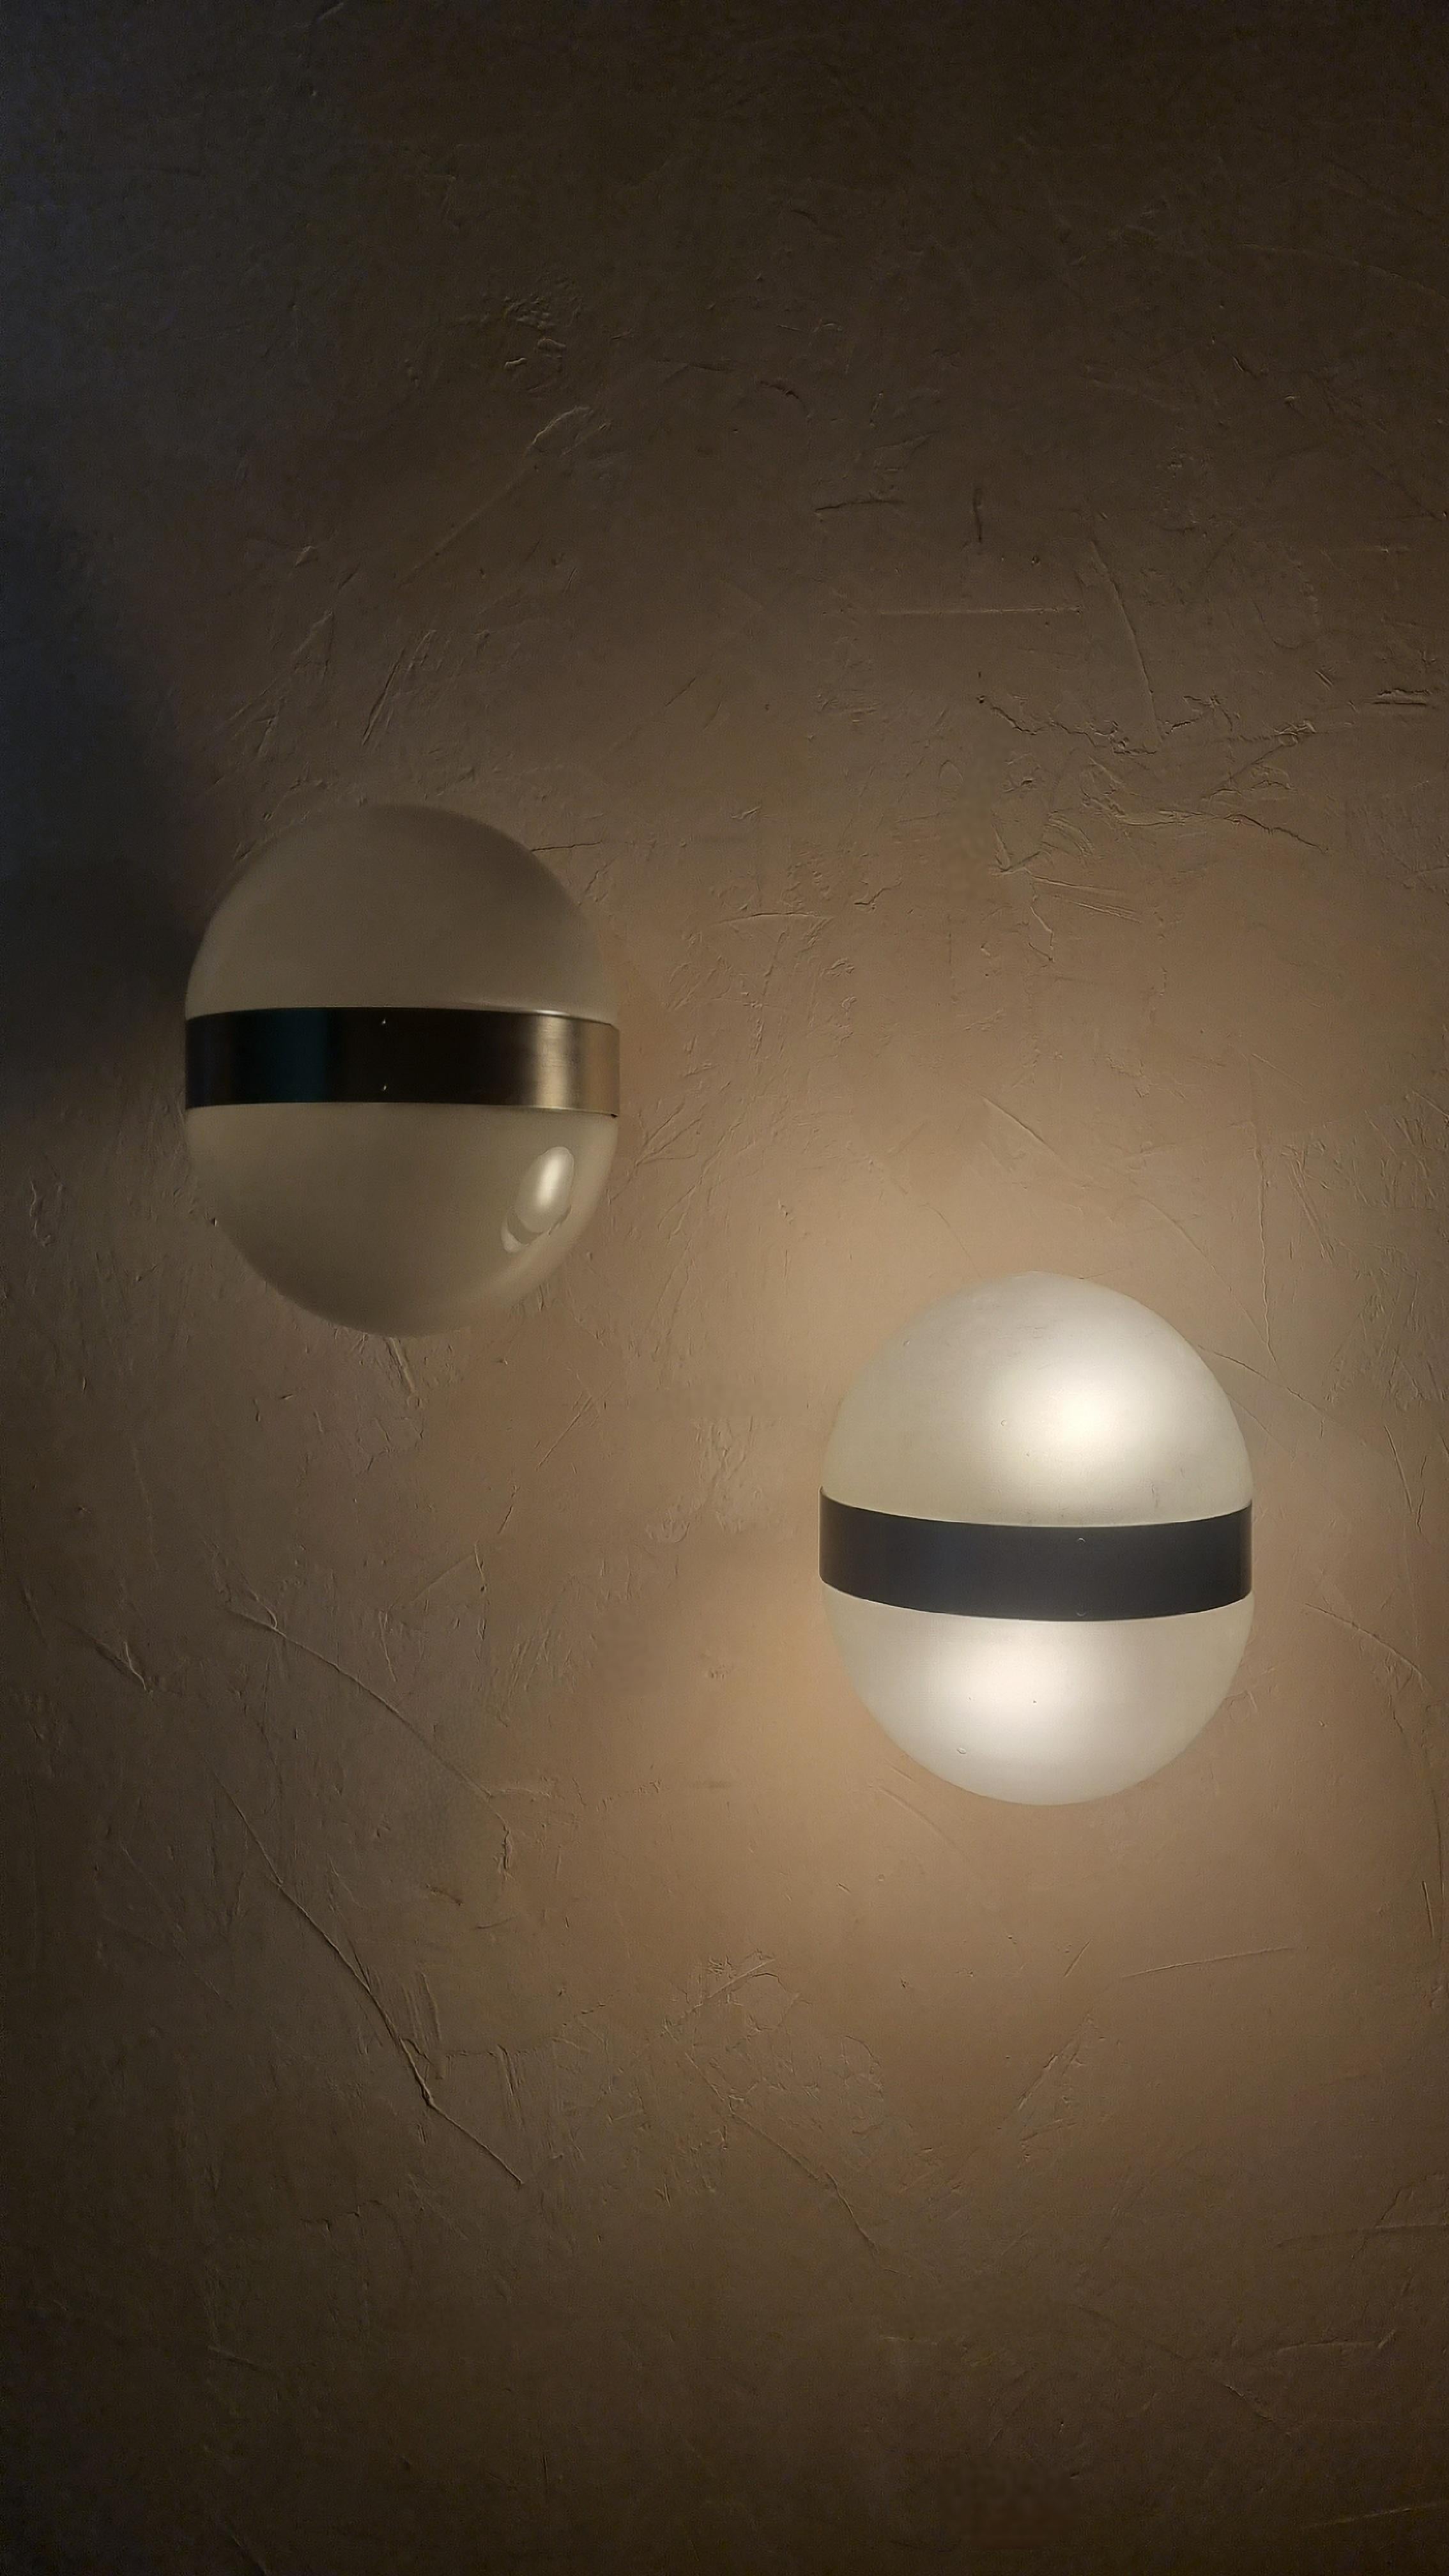 Pair of 2 Clio wall sconces designed by Sergio Mazza for Artemide in the 1963, frosted glass lampshade , structure in nickel-plated brass, each lamp  superimposed 2 light points that emit a warm and soft light. mounts E 27 bulbs.
Excellent